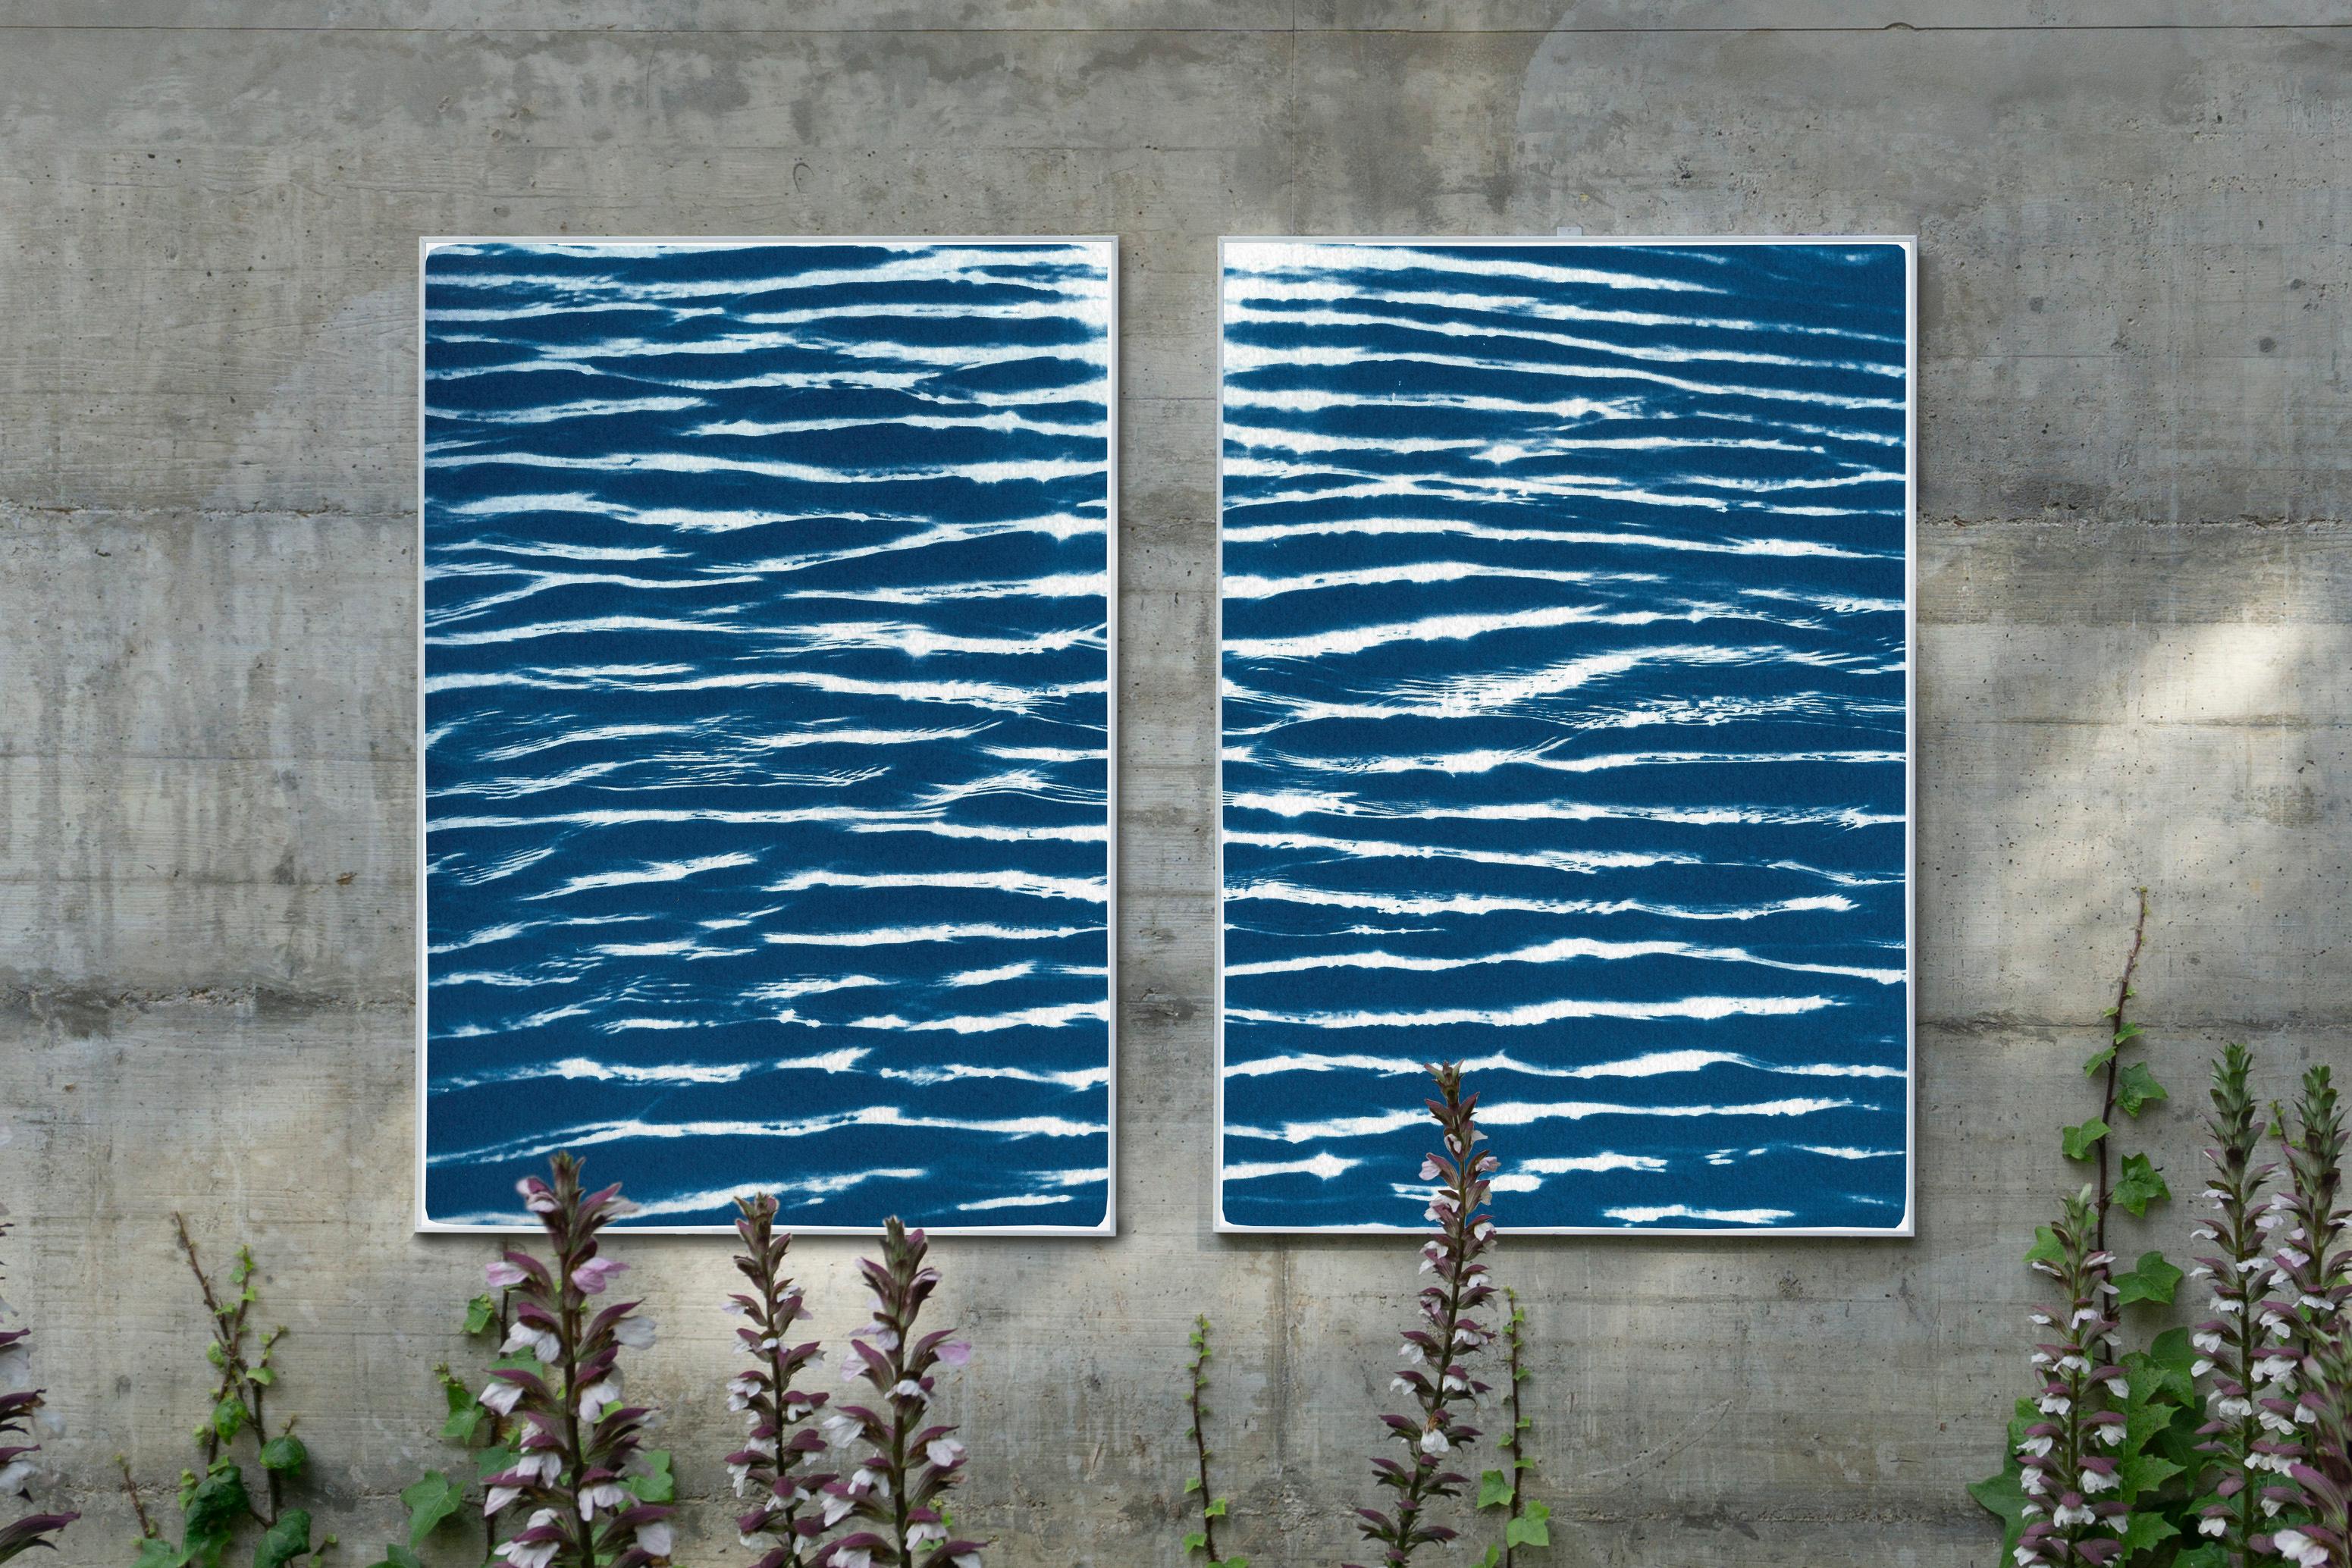 Tranquil Water Patterns, Abstract Nautical Diptych in Blue, Handmade Seascape  - Minimalist Art by Kind of Cyan